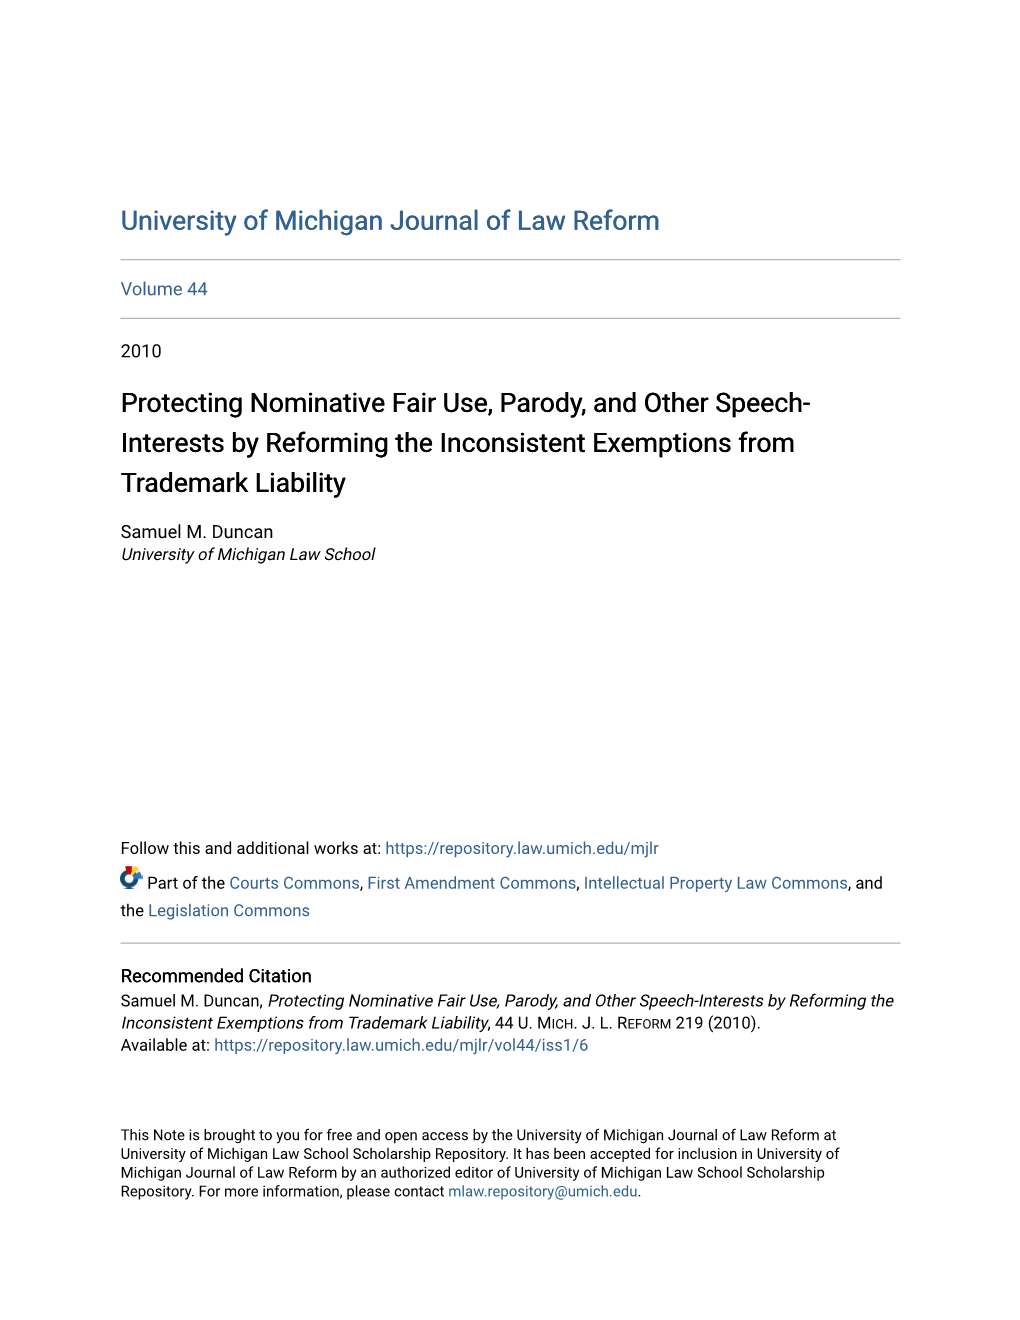 Protecting Nominative Fair Use, Parody, and Other Speech-Interests by Reforming the Inconsistent Exemptions from Trademark Liability, 44 U